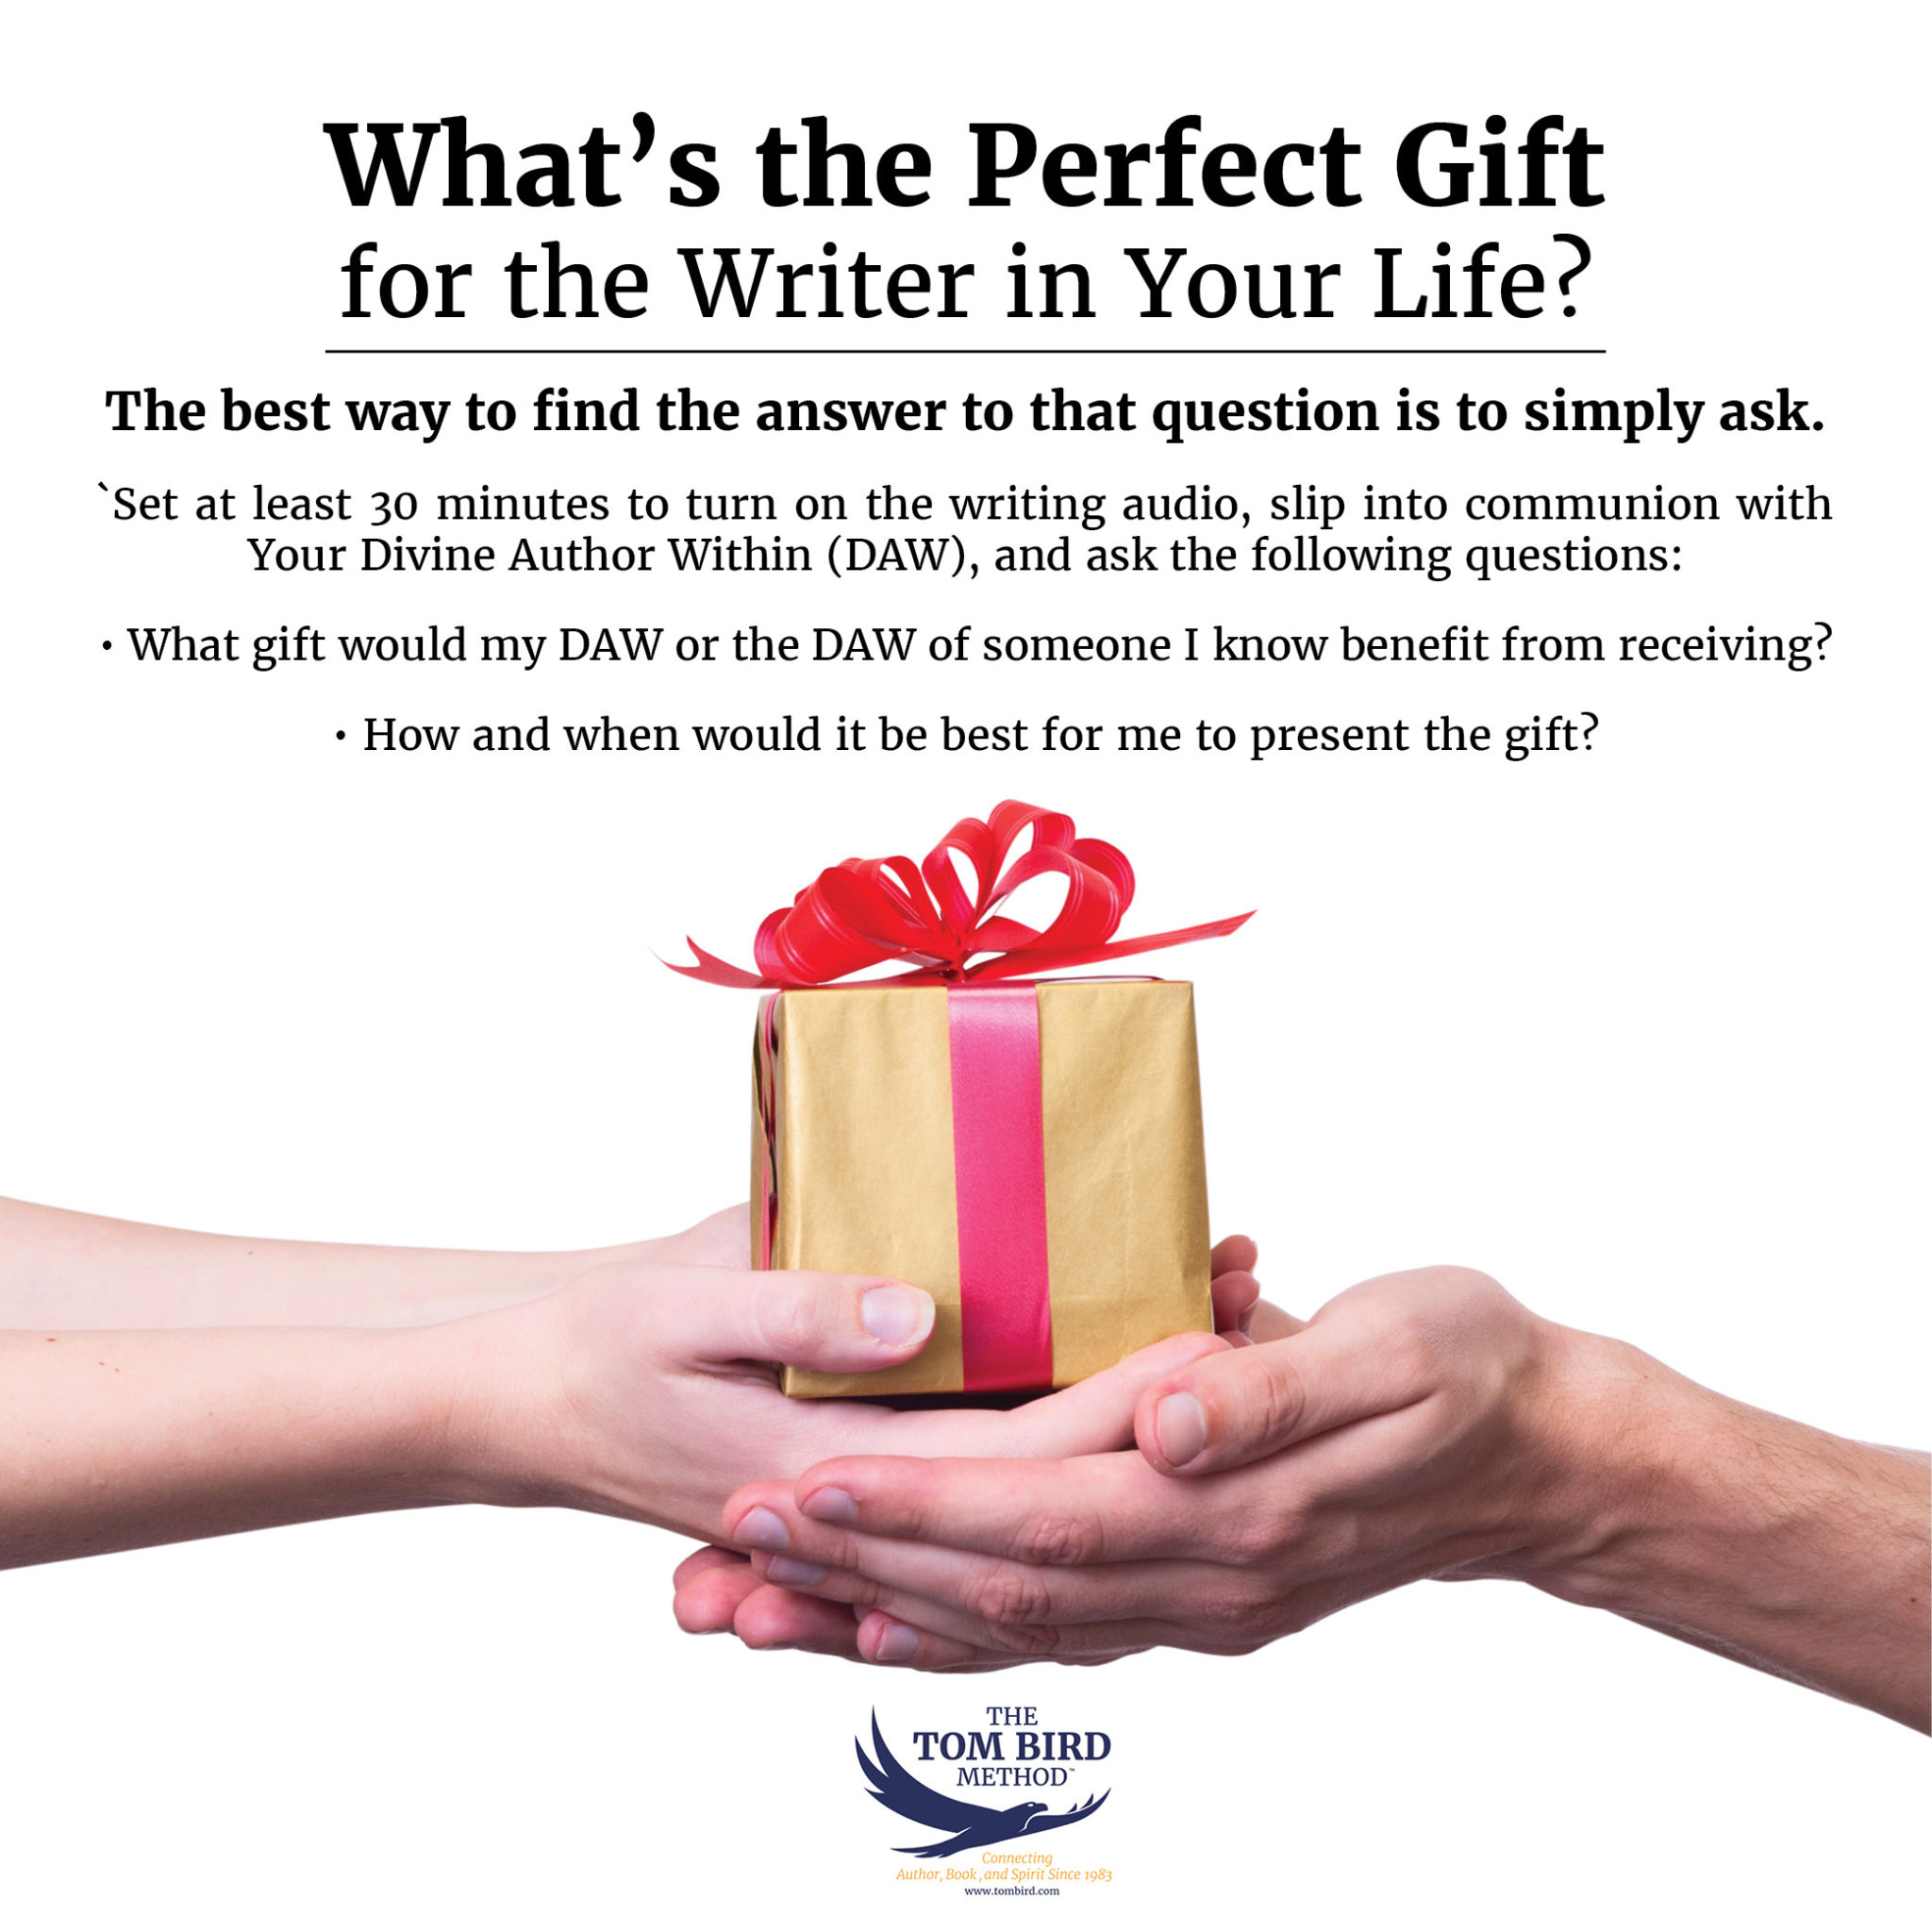 What is the perfect gift - Tom Bird